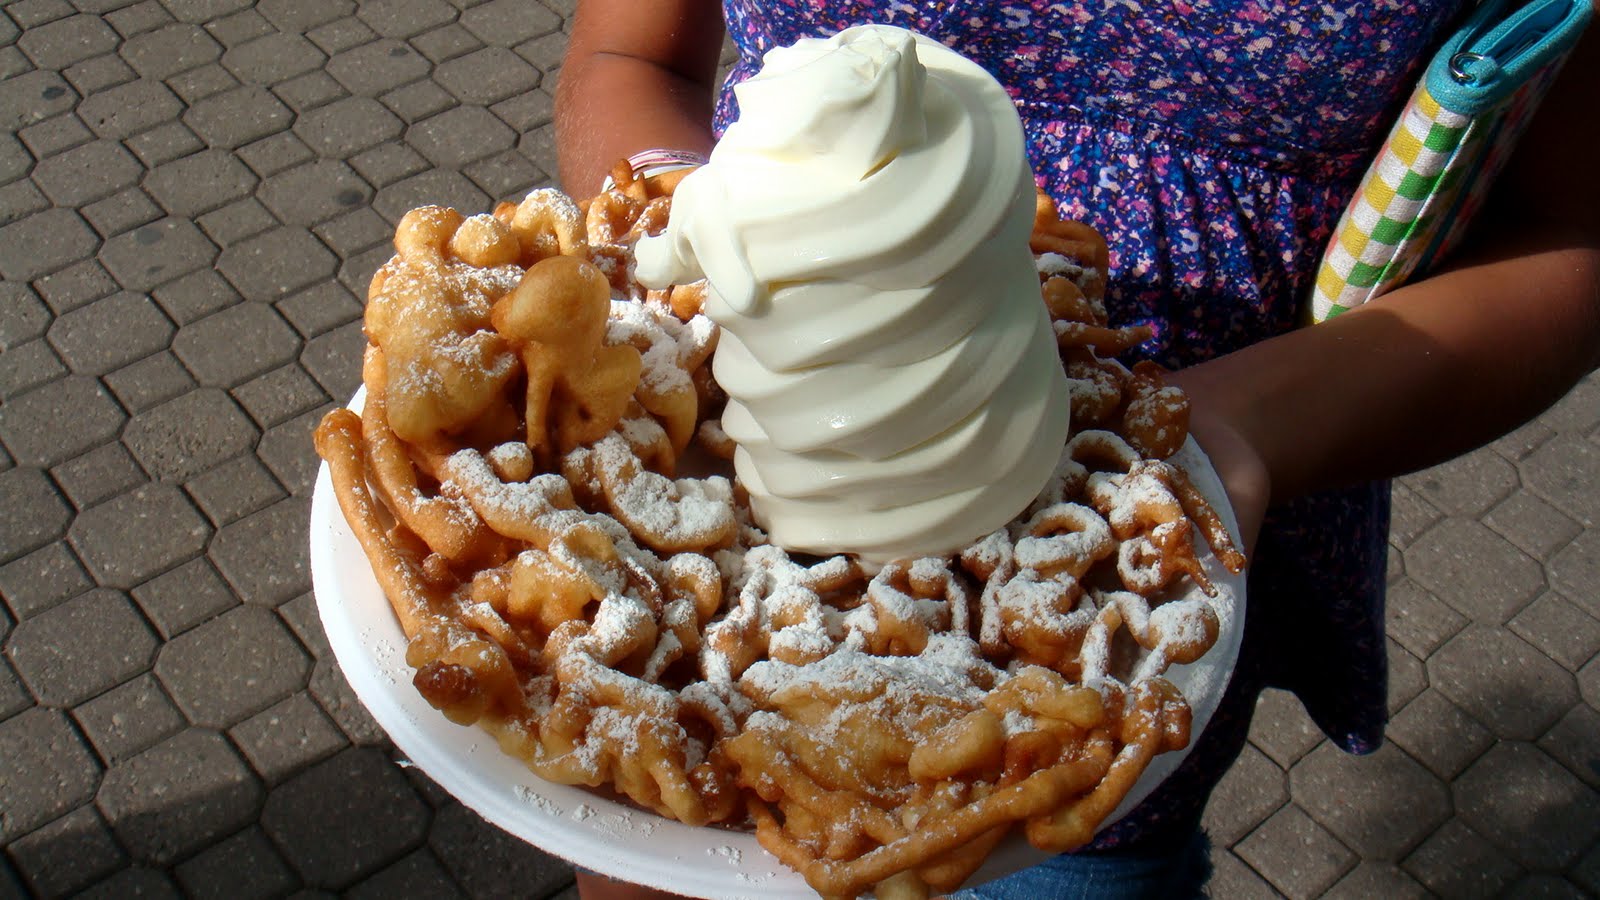 Literally the BEST funnel cake. EVER.